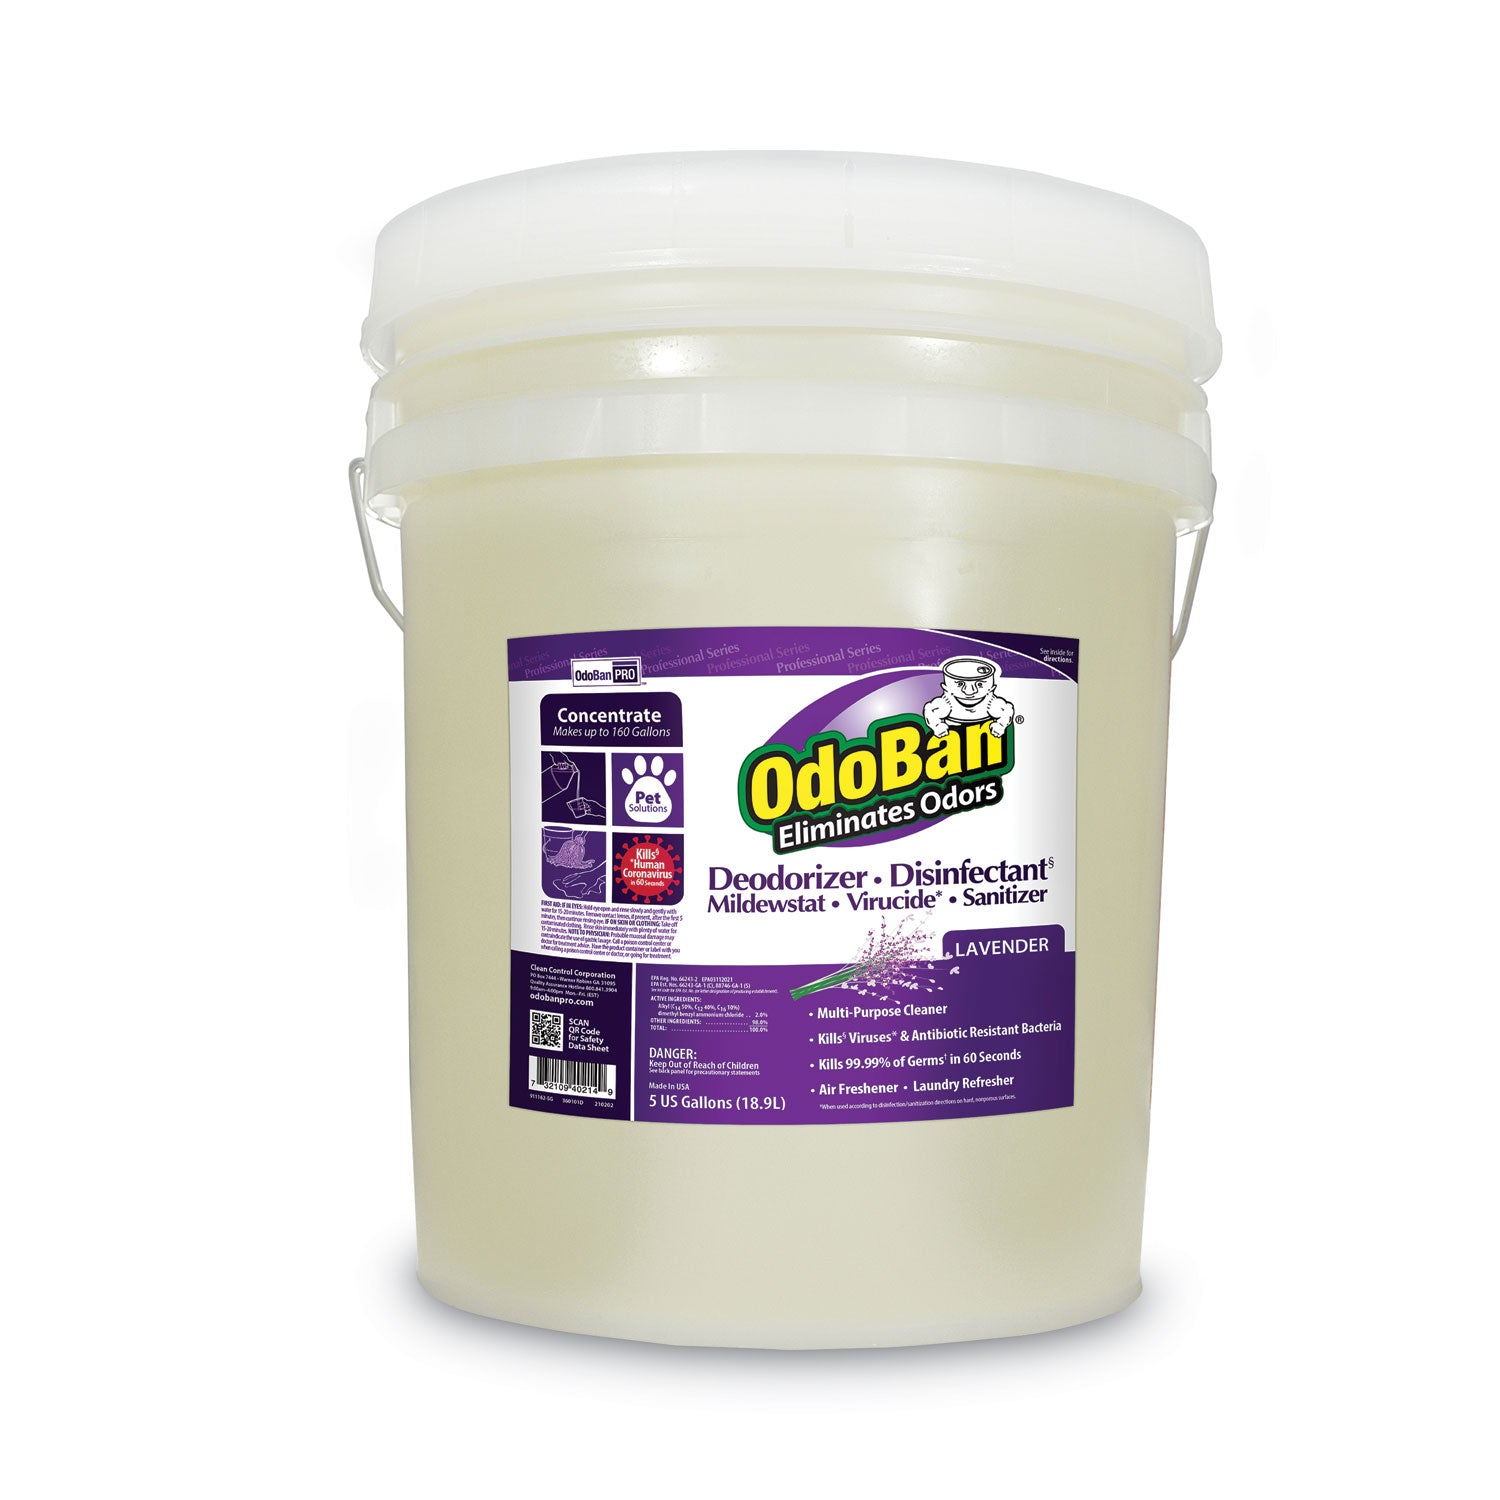 concentrated-odor-eliminator-and-disinfectant-lavender-scent-5-gal-pail_odo9111625g - 1